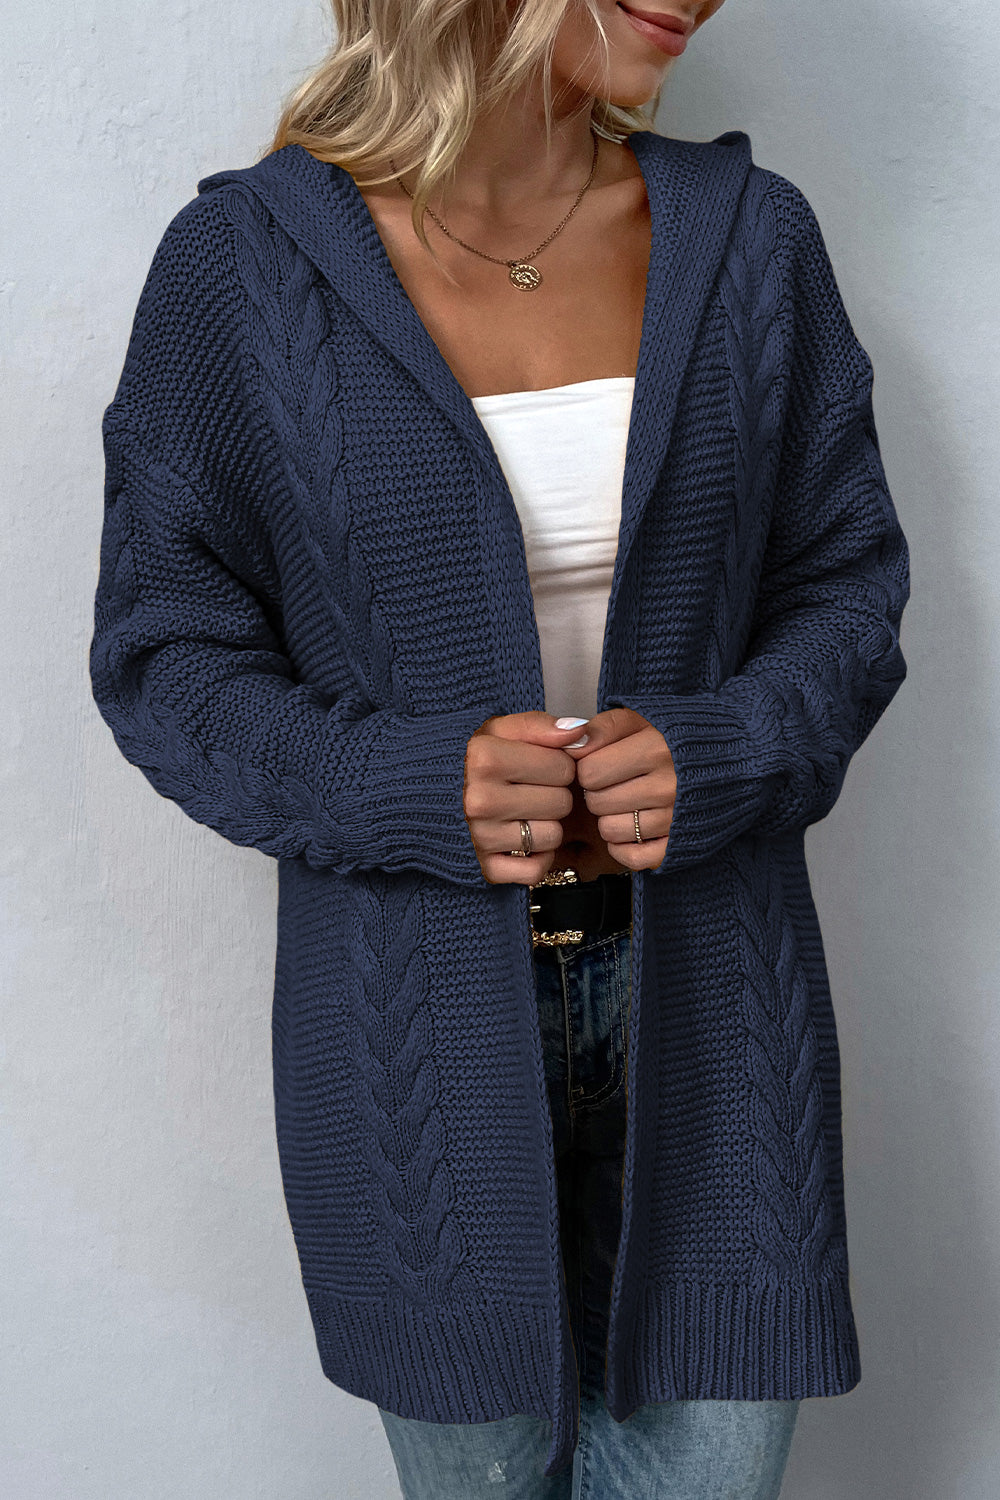 Trendsi Cupid Beauty Supplies Navy / S Woman Cardigan Cable-Knit Dropped Shoulder Hooded Cardigan